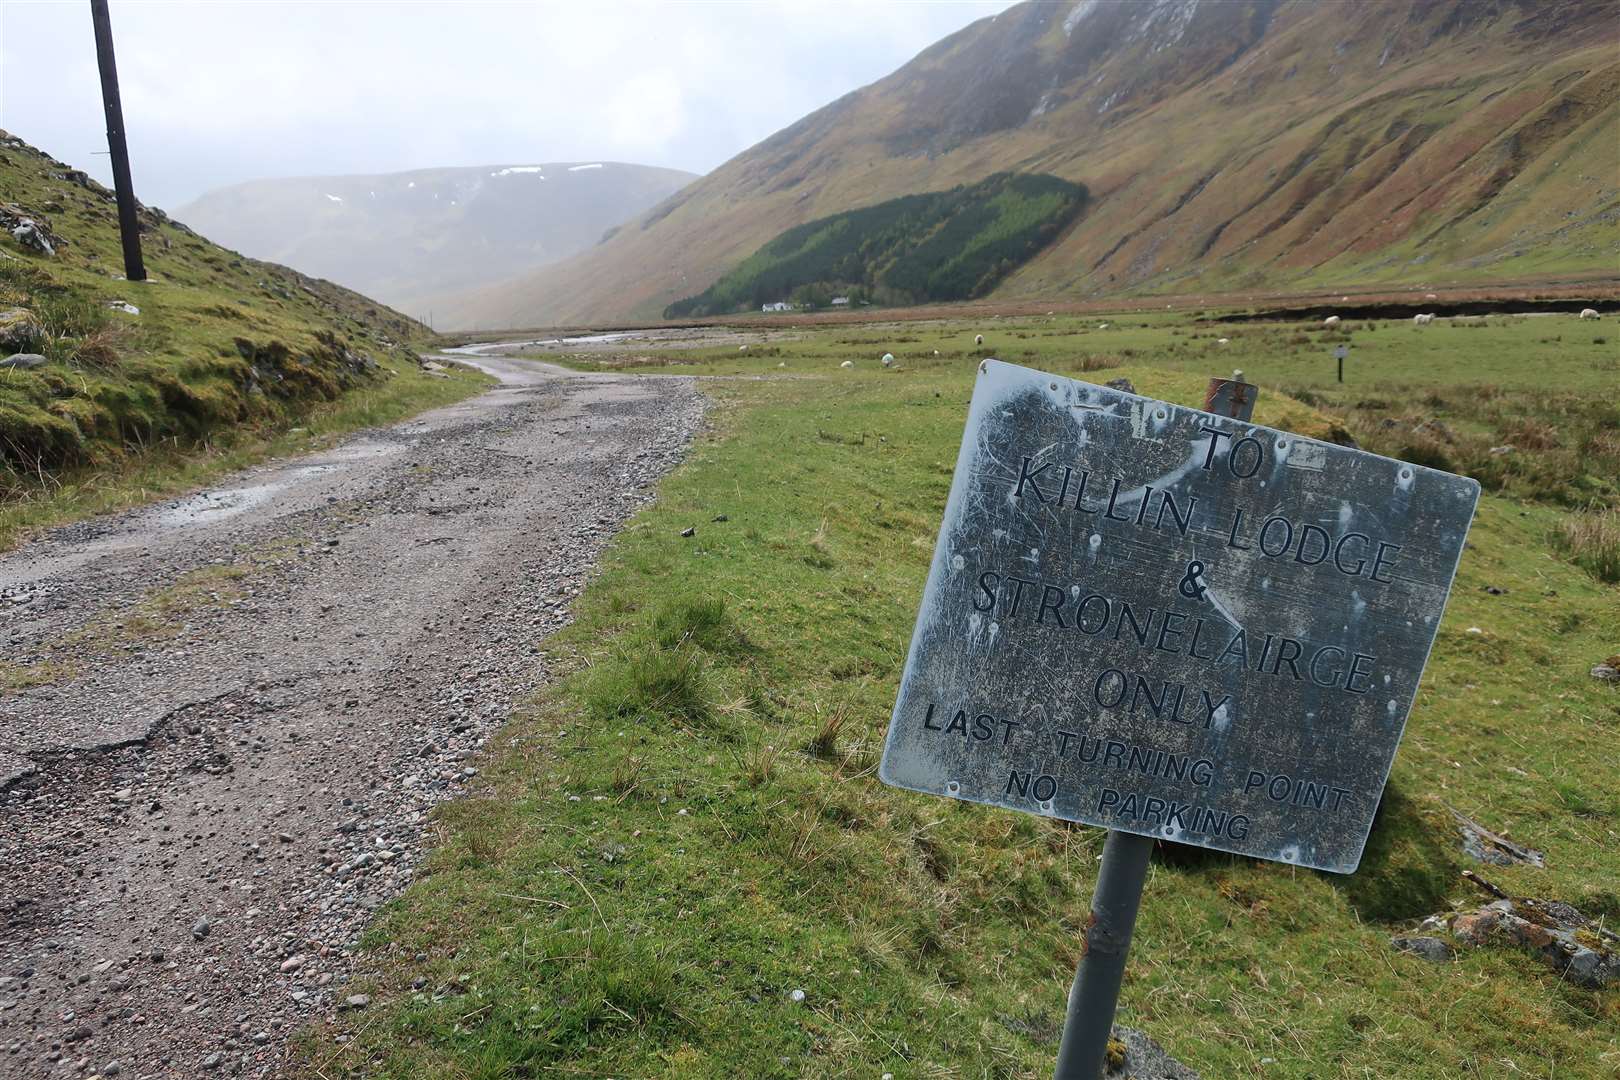 An old sign on the now dilapidated road to Killin Lodge and Stronelairge.